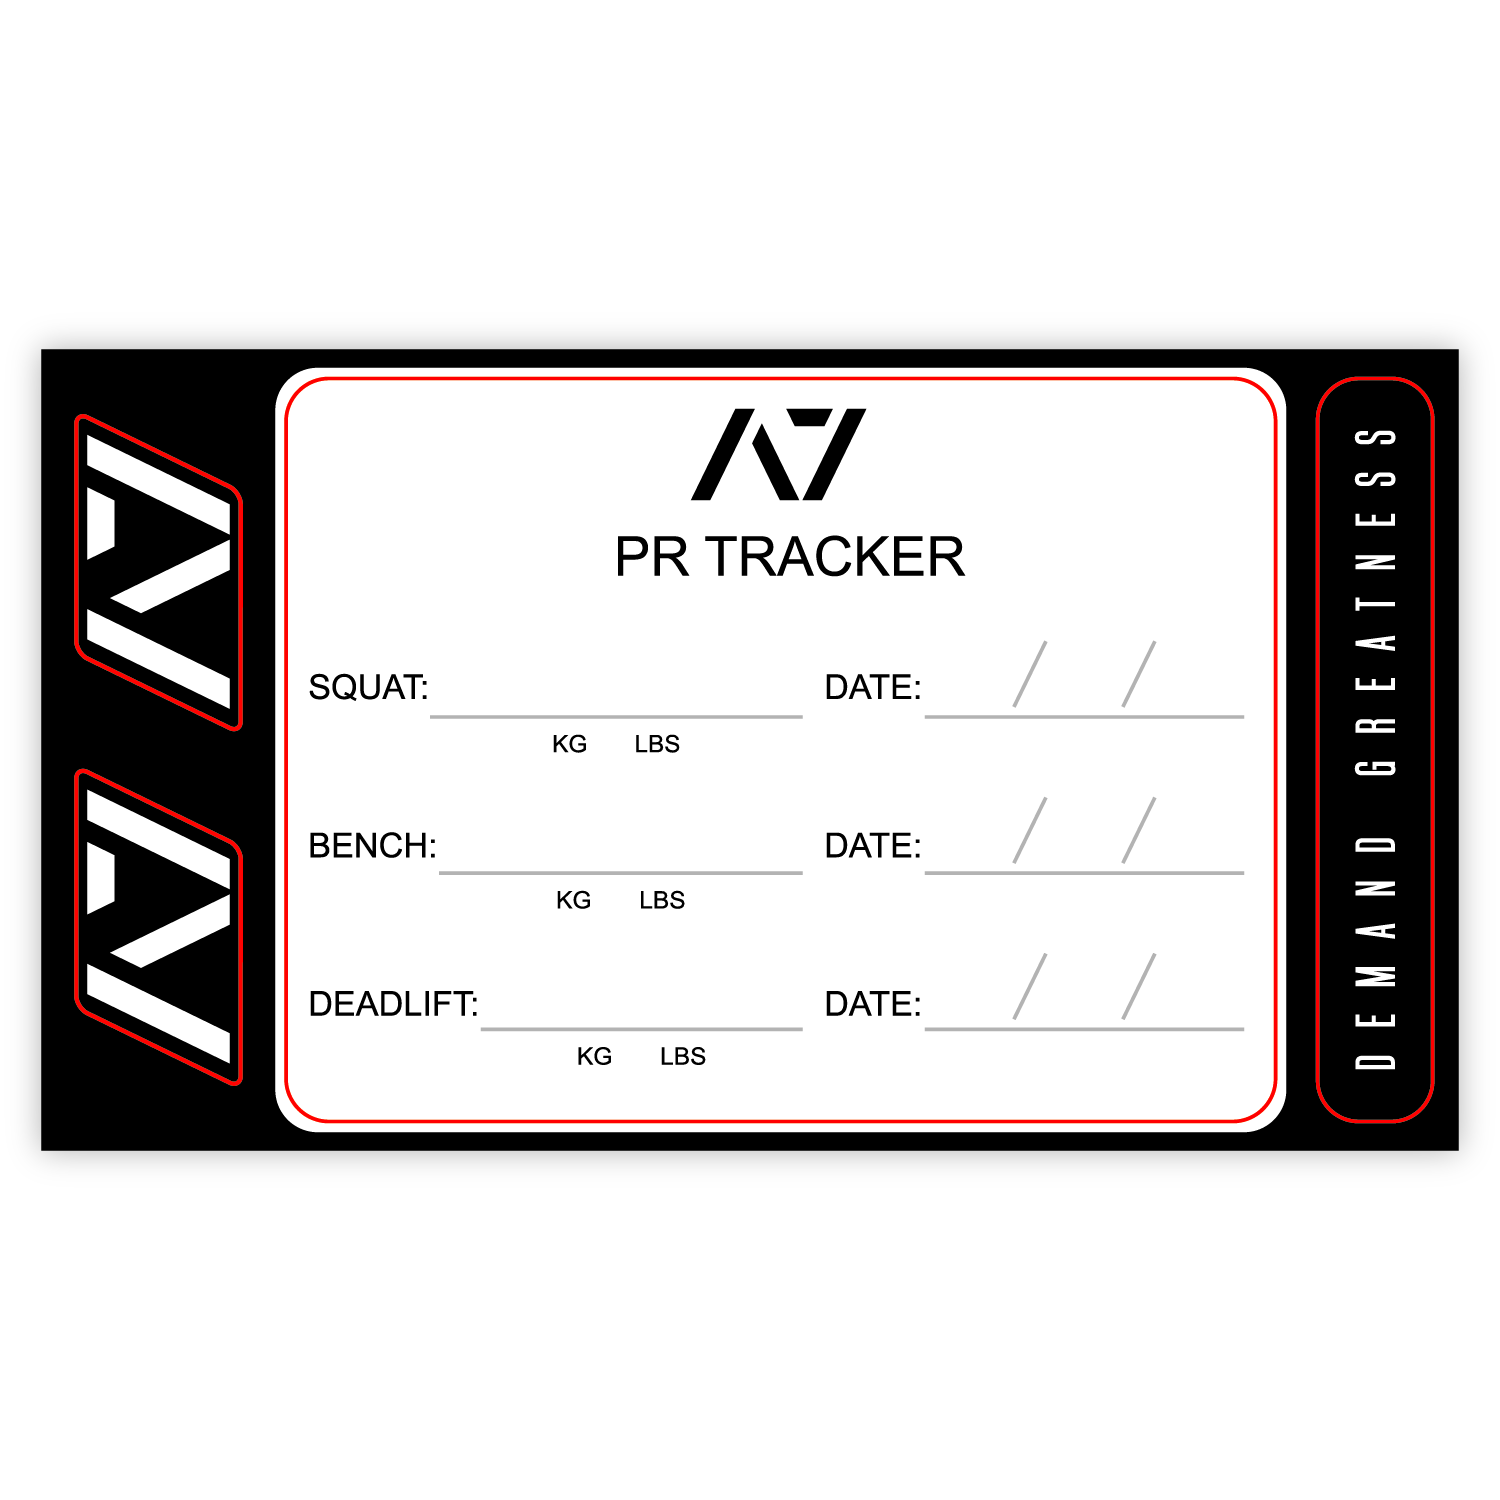 A7 PR Tracker sheet was designed to allow you to document your PRs and progress in your training of Squat, Bench and Deadlift in a convenient sheet that you can attach to your belt, your gym banner or even your home gym wall. It include a small A7 Permanent marker with a keyring to help document our success along with 2 A7 stickers and 1 Demand Greatness sticker.